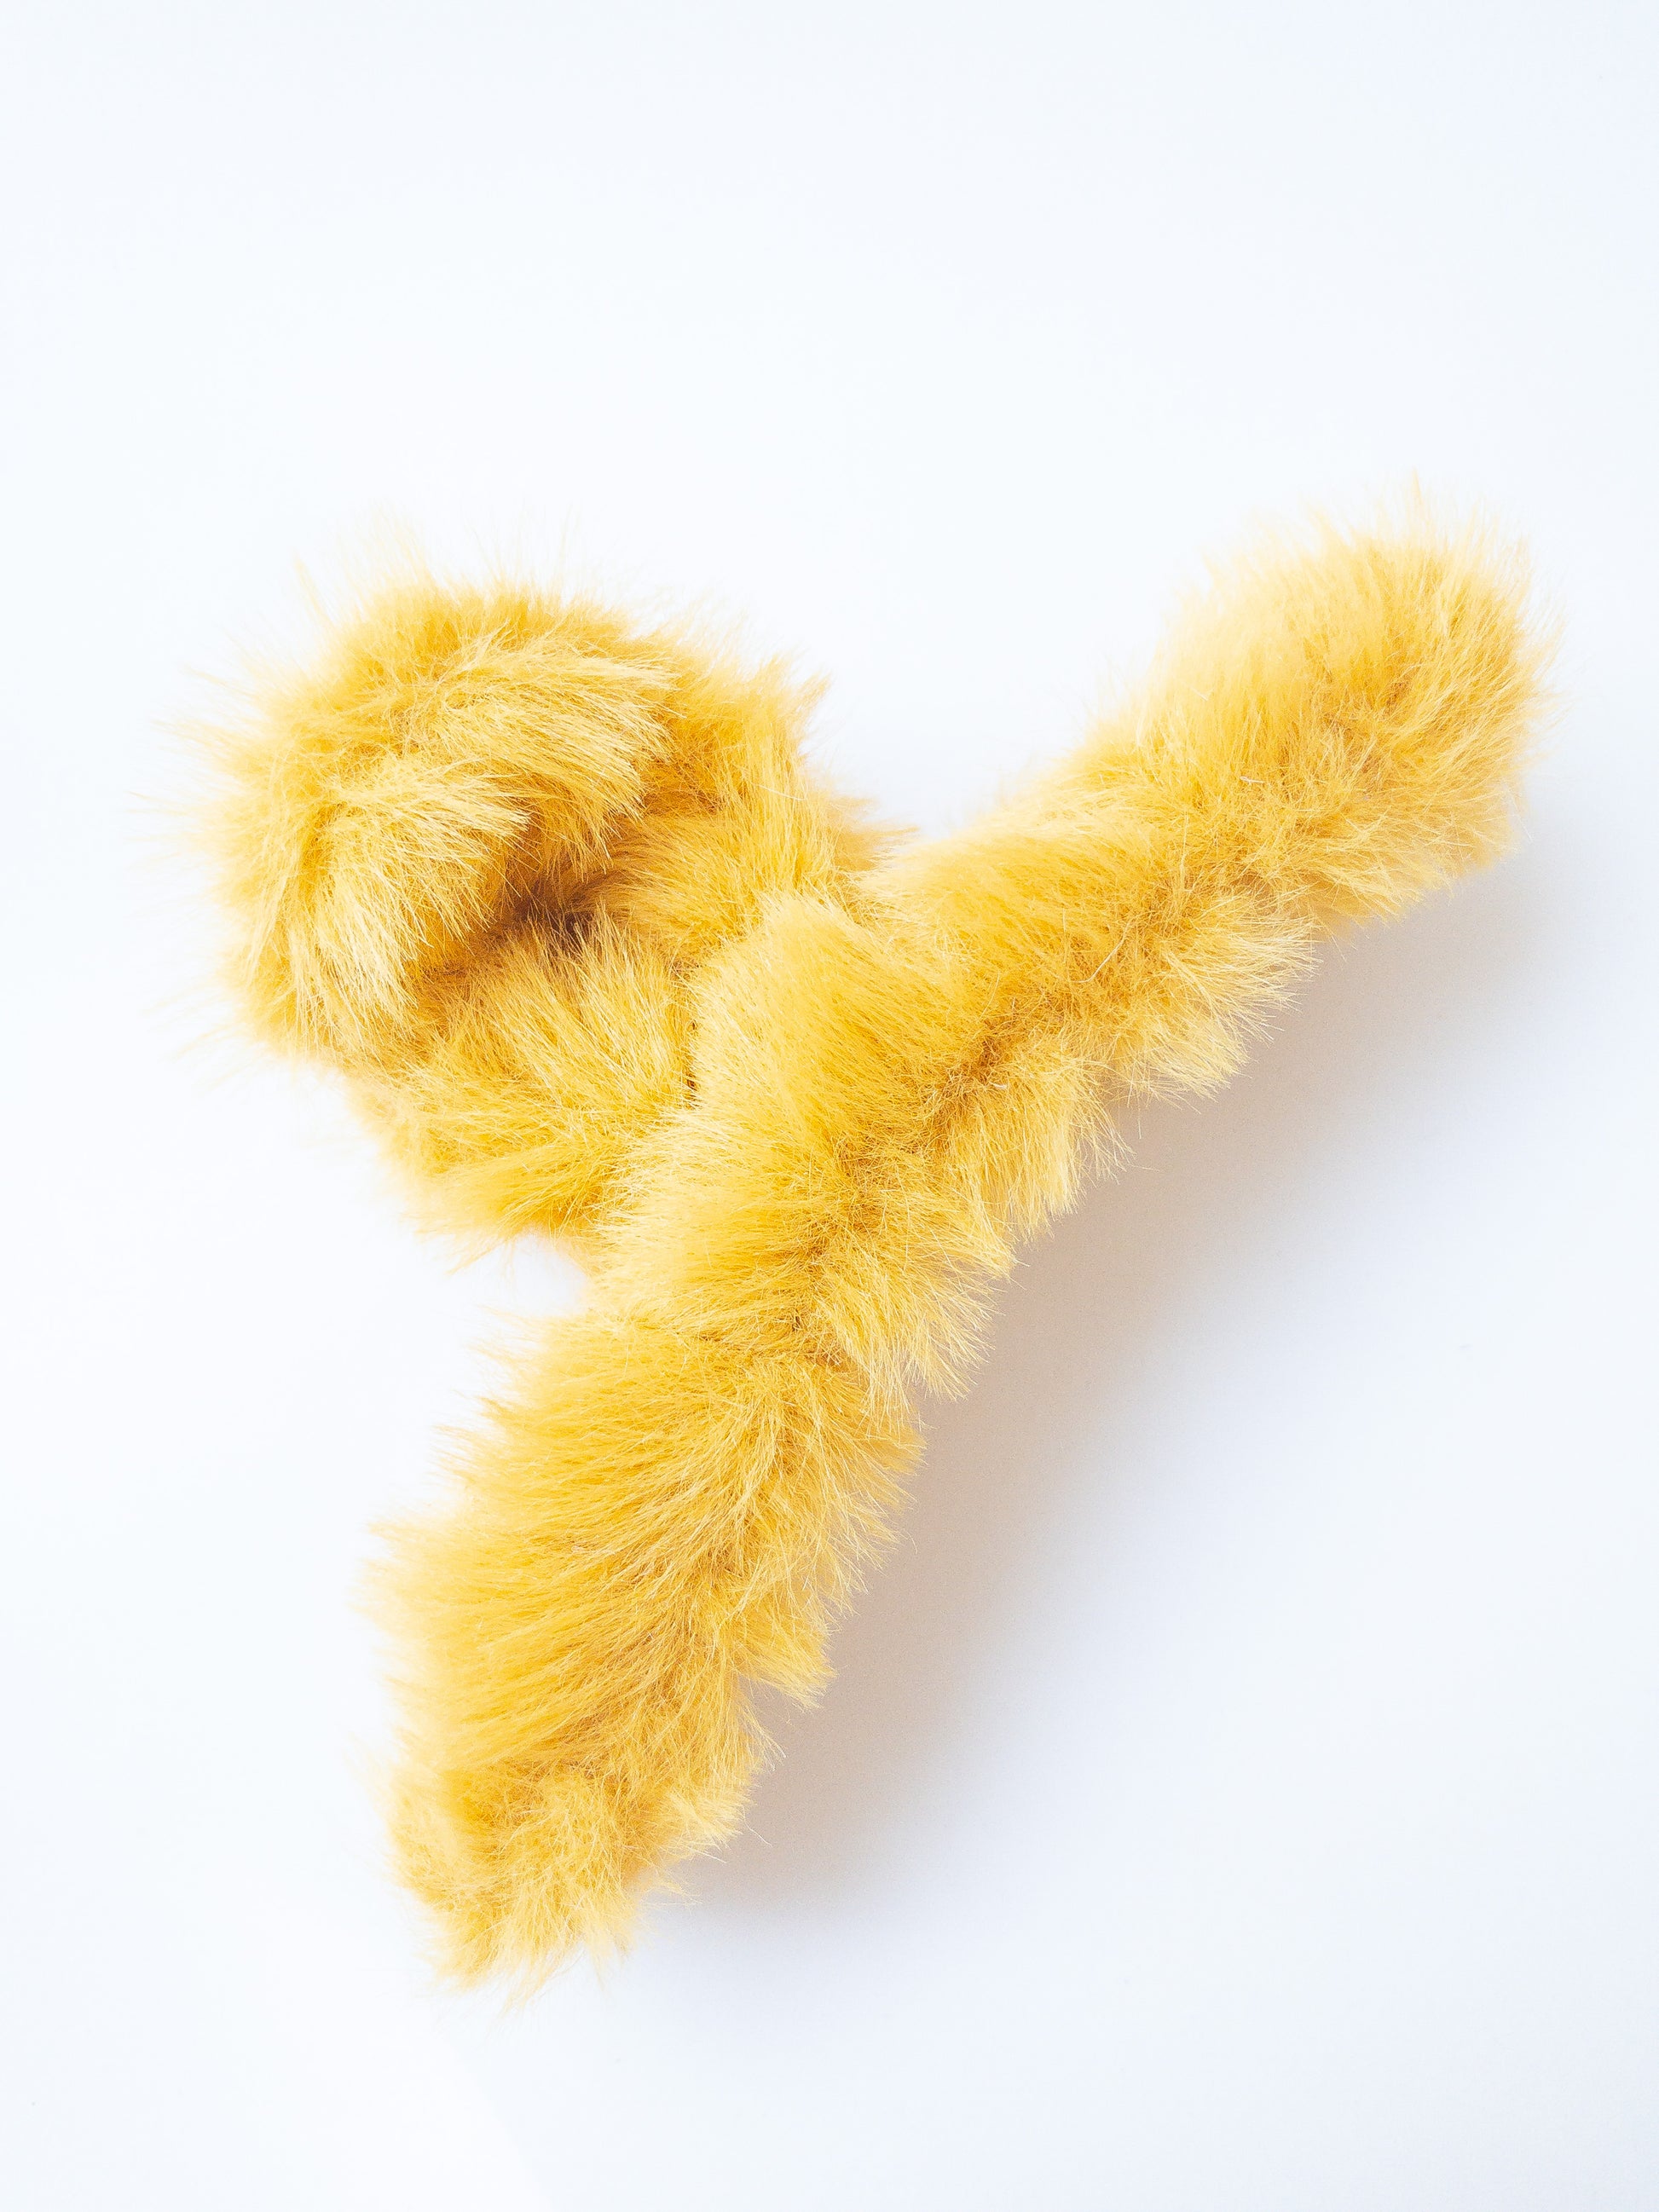 Just pure softness in a hair claw. Each transparent loop hair claw is wrapped in a furry soft yellow fabric for those easy to grab, messy hair days.